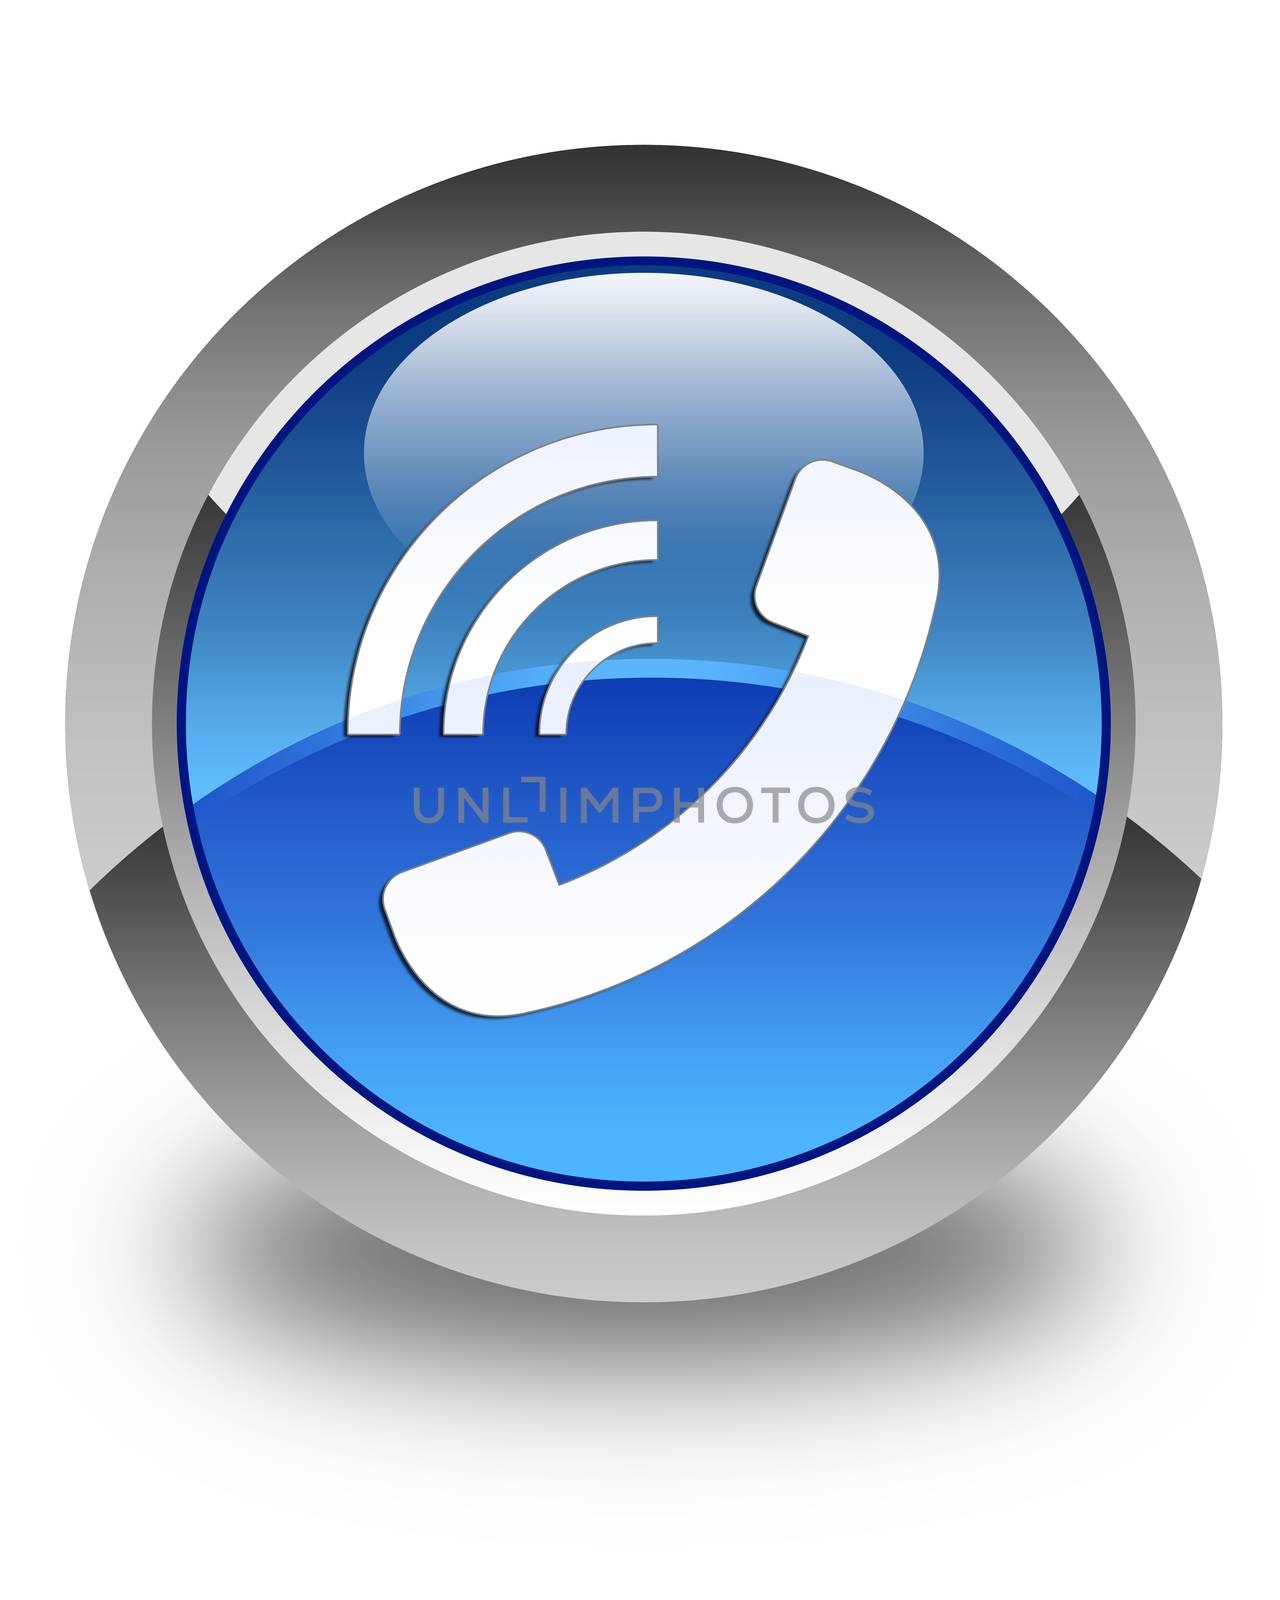 Phone ringing icon glossy blue round button